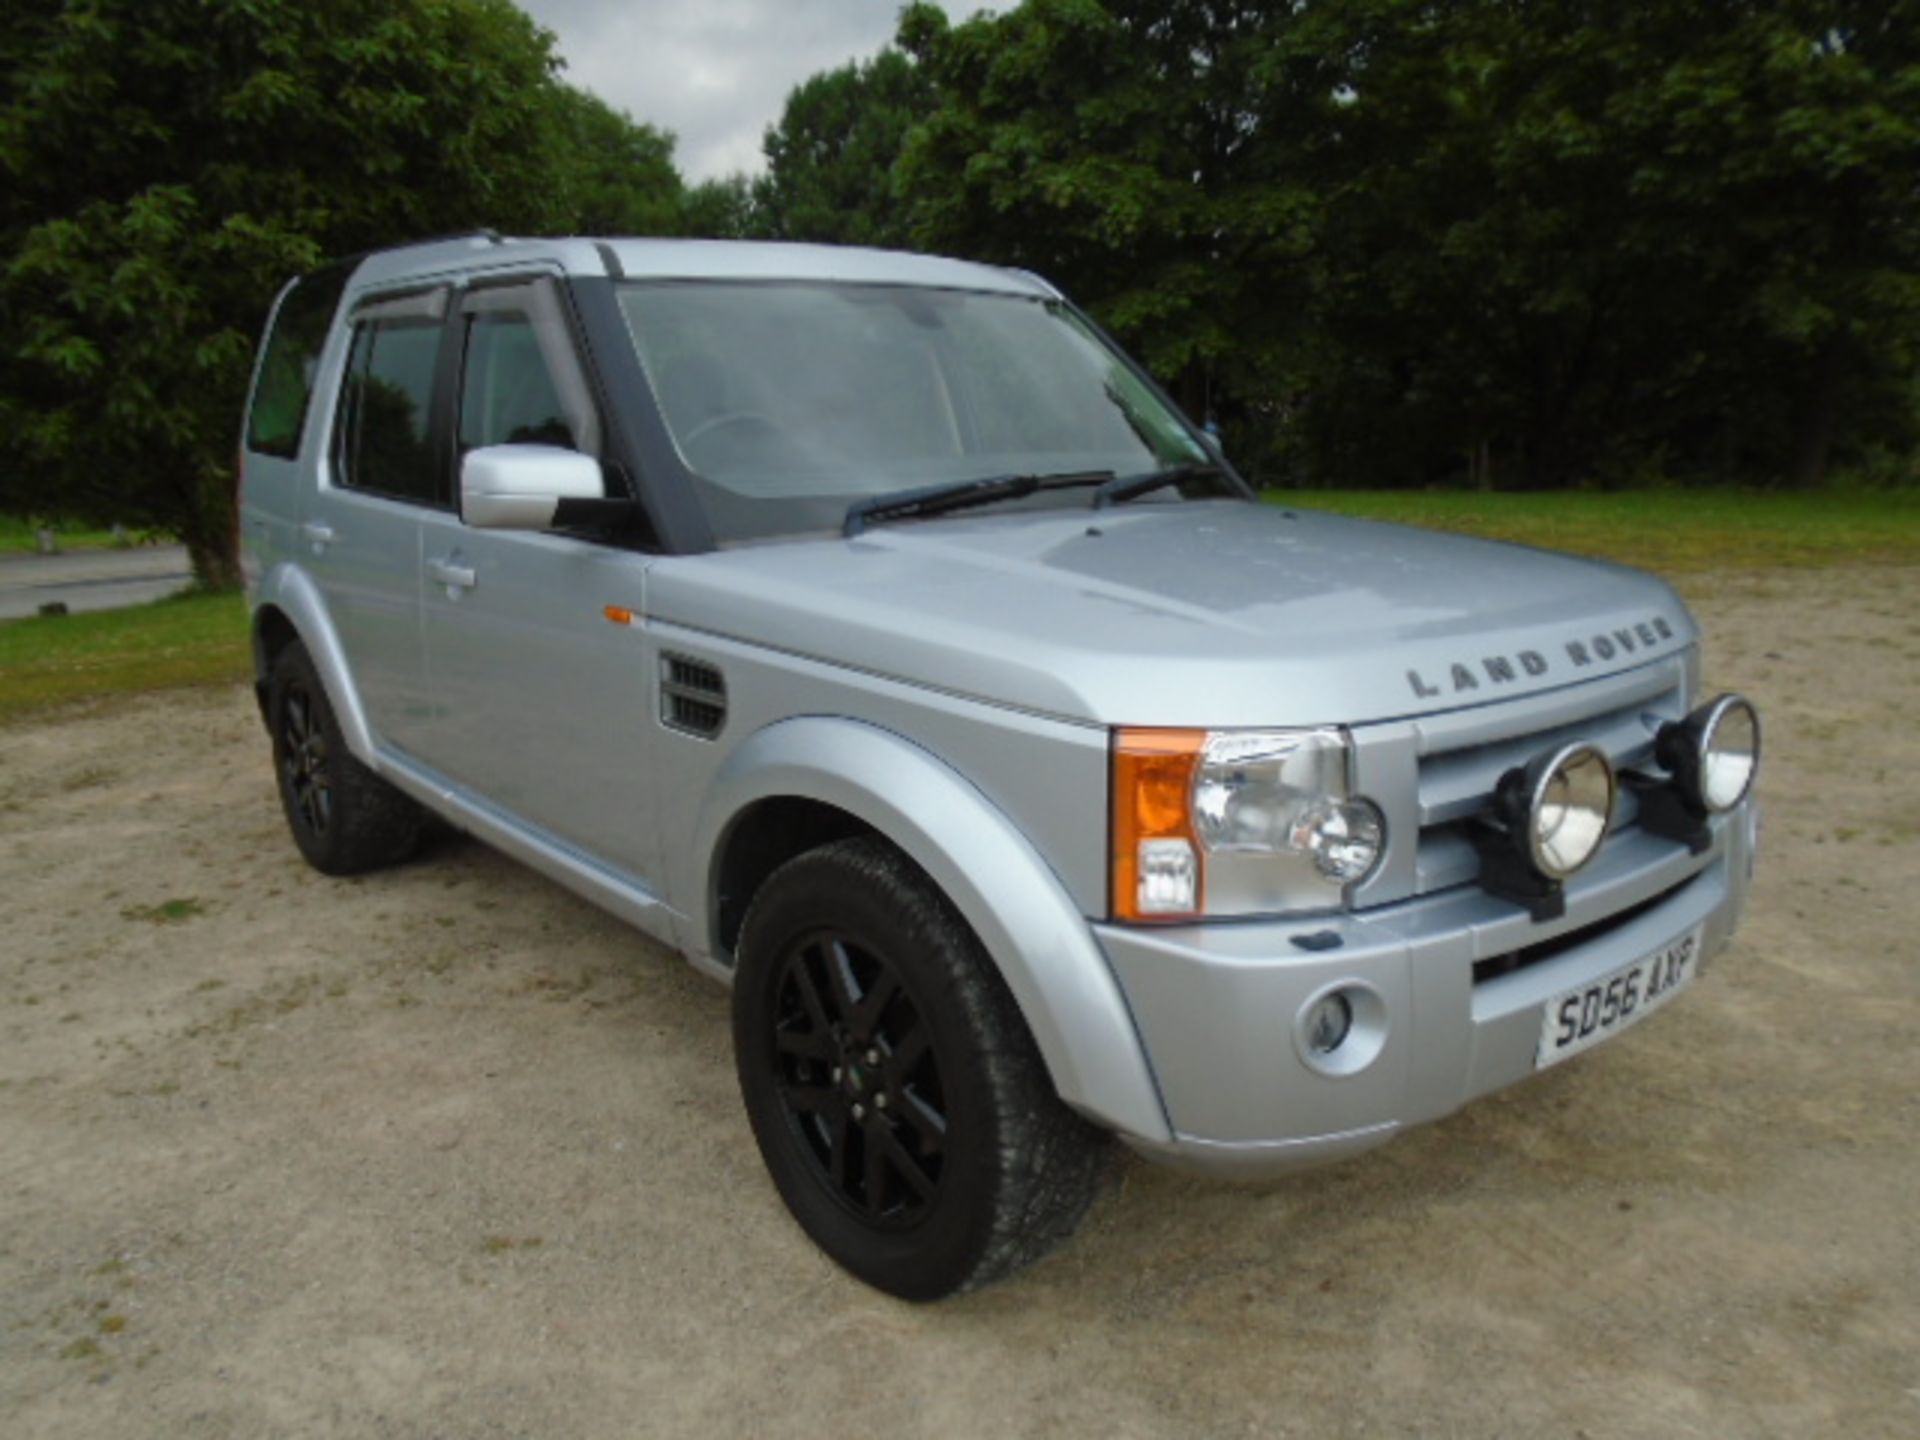 2006/56 REG LAND ROVER DISCOVERY TDV6 XS AUTOMATIC 2.7 DIESEL ESTATE *NO VAT* - Image 9 of 13